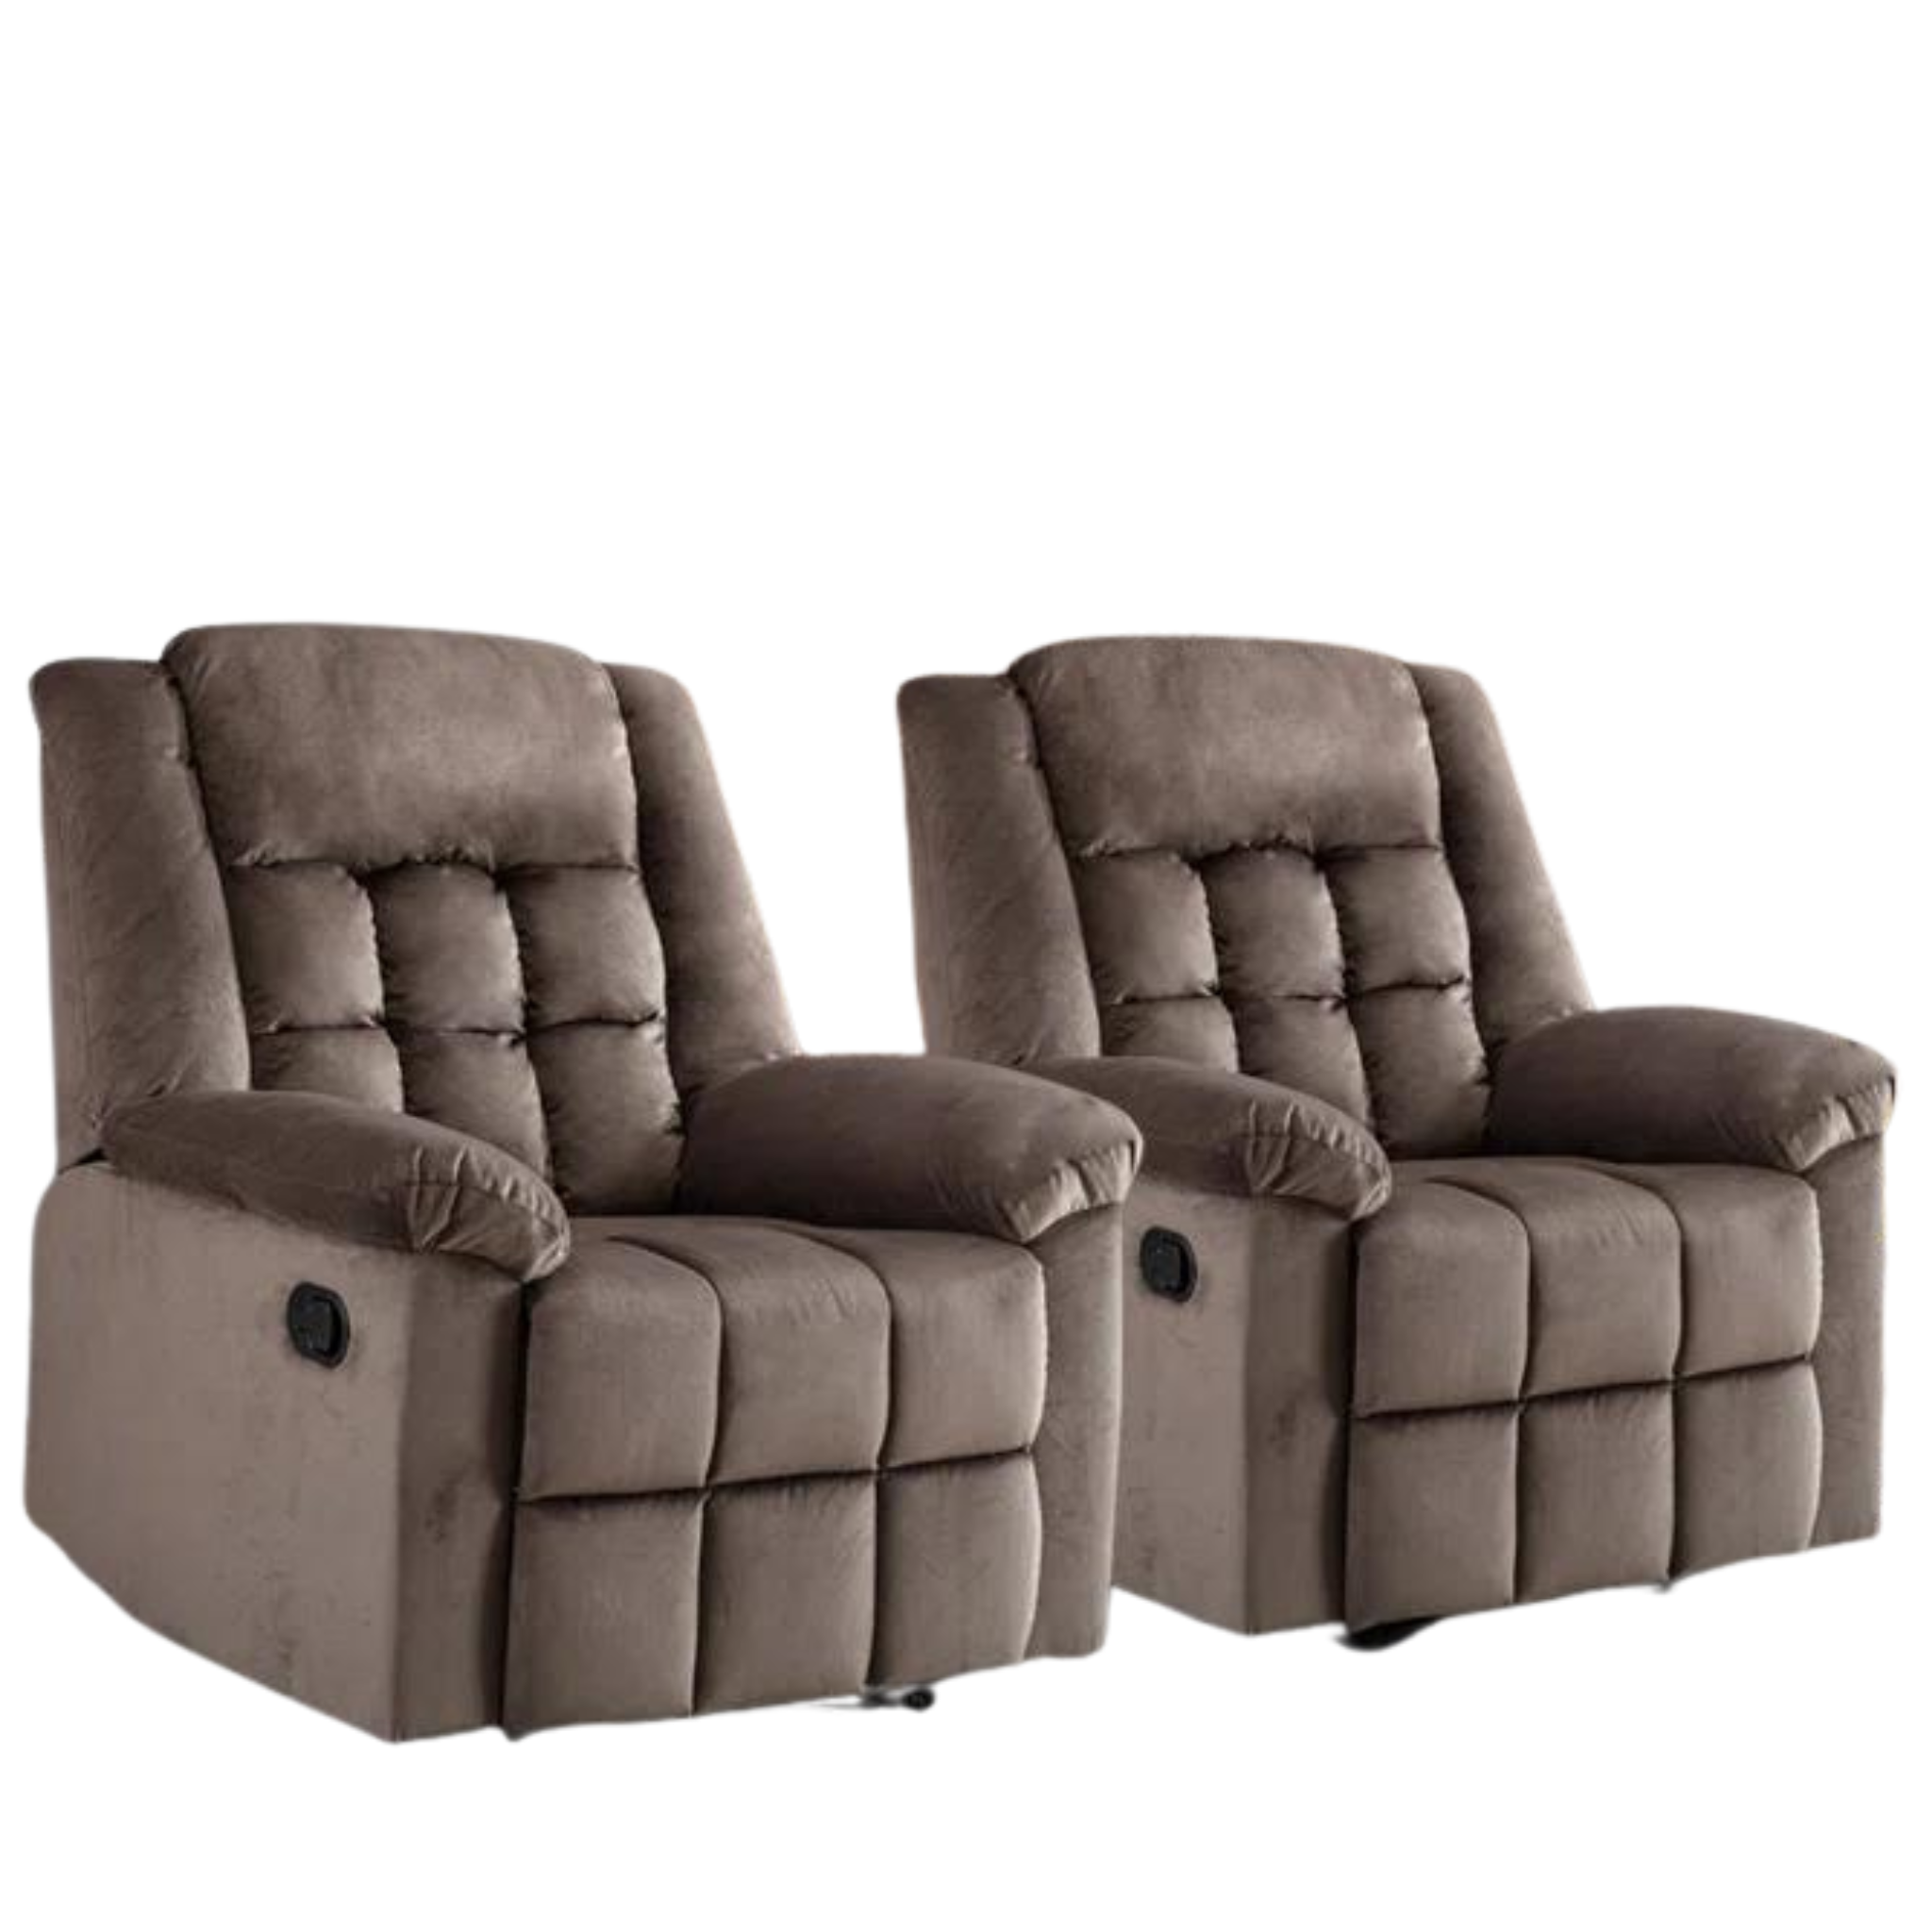 Set of 2 Marlia Upholstered Recliners (Grey or Brown)